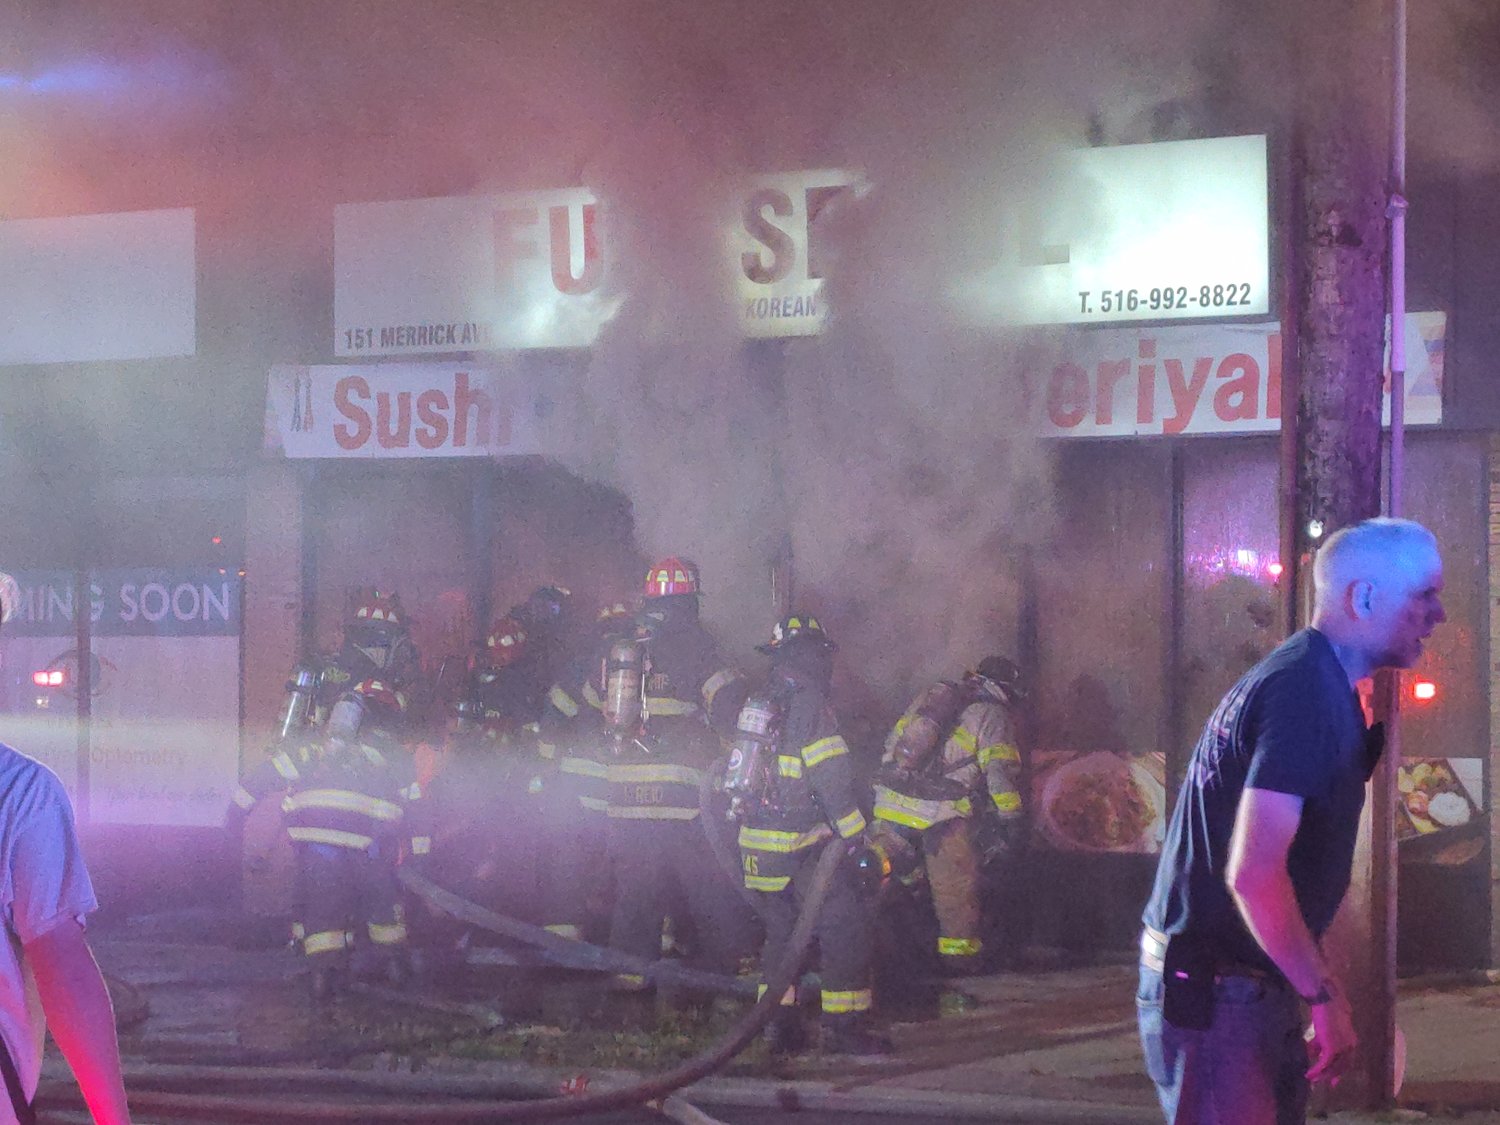 Smoke was pouring out the Fuji Seoul Restaurant Wednesday night in Merrick as firefighters battled the blaze.